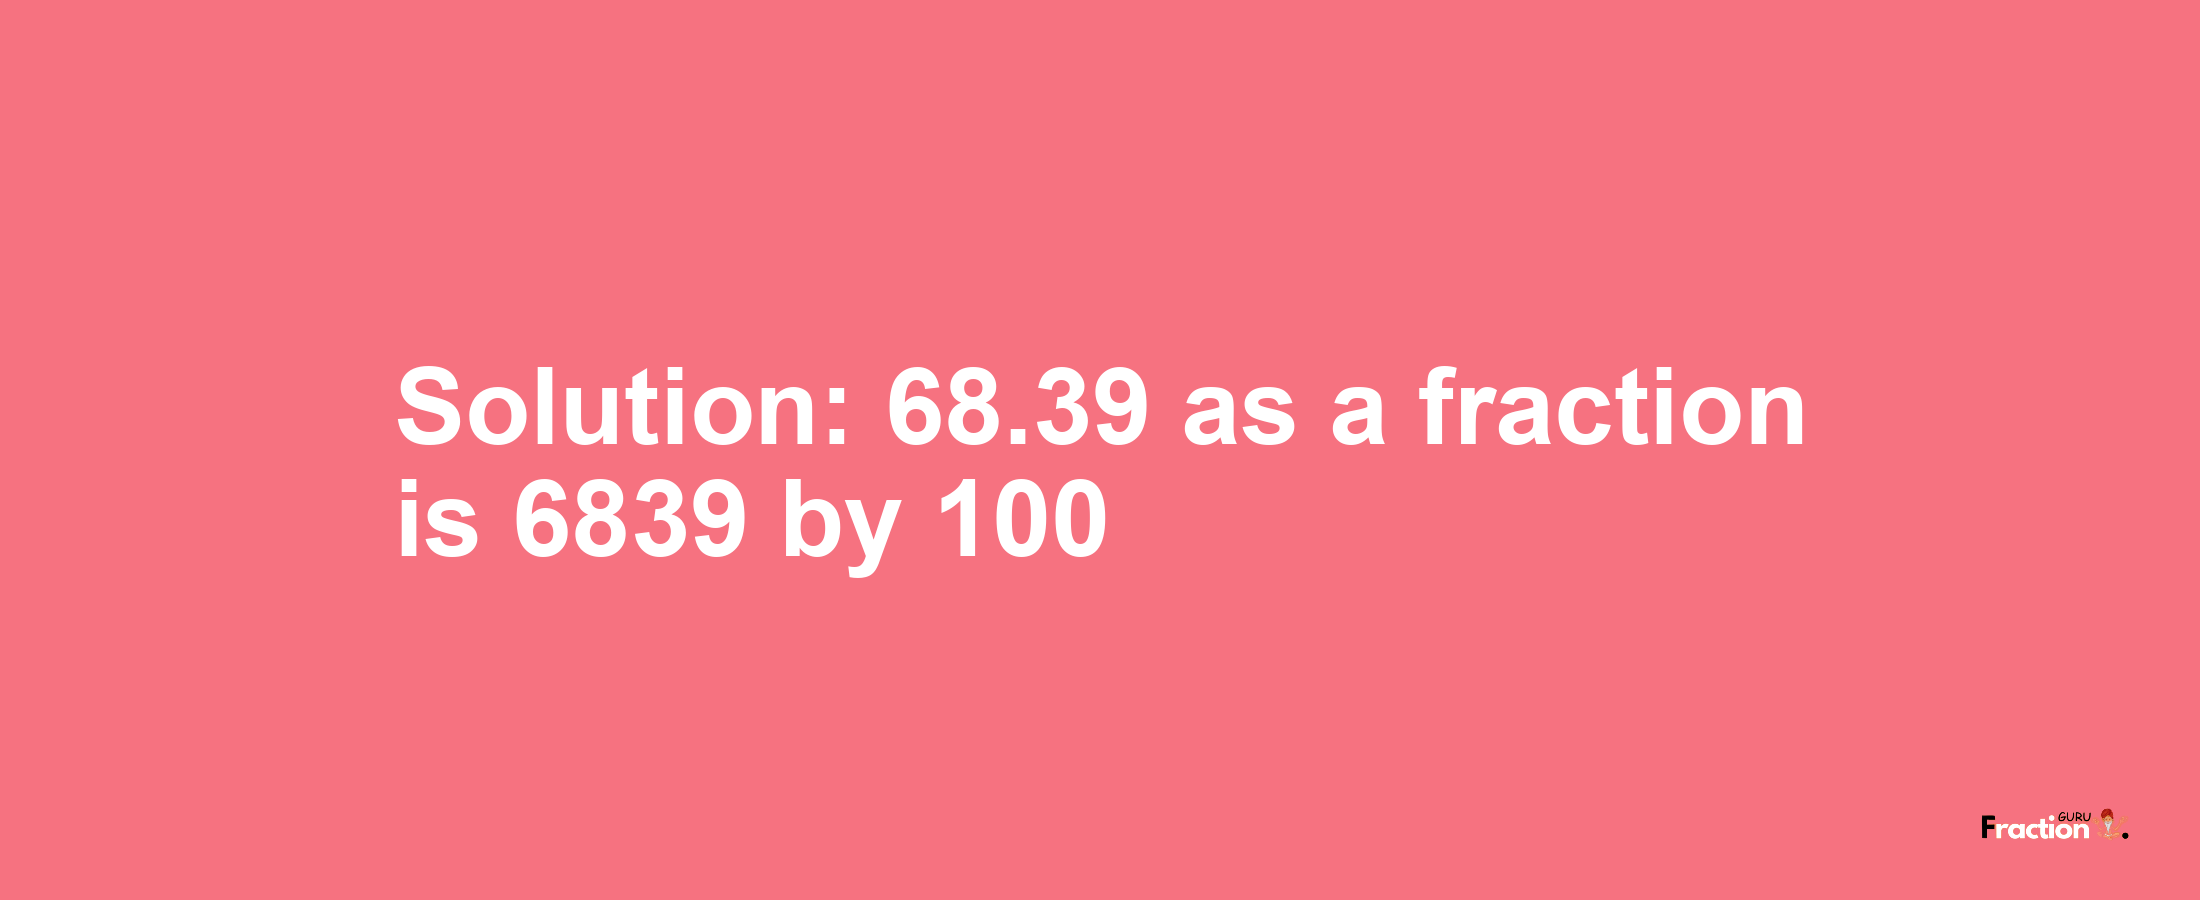 Solution:68.39 as a fraction is 6839/100